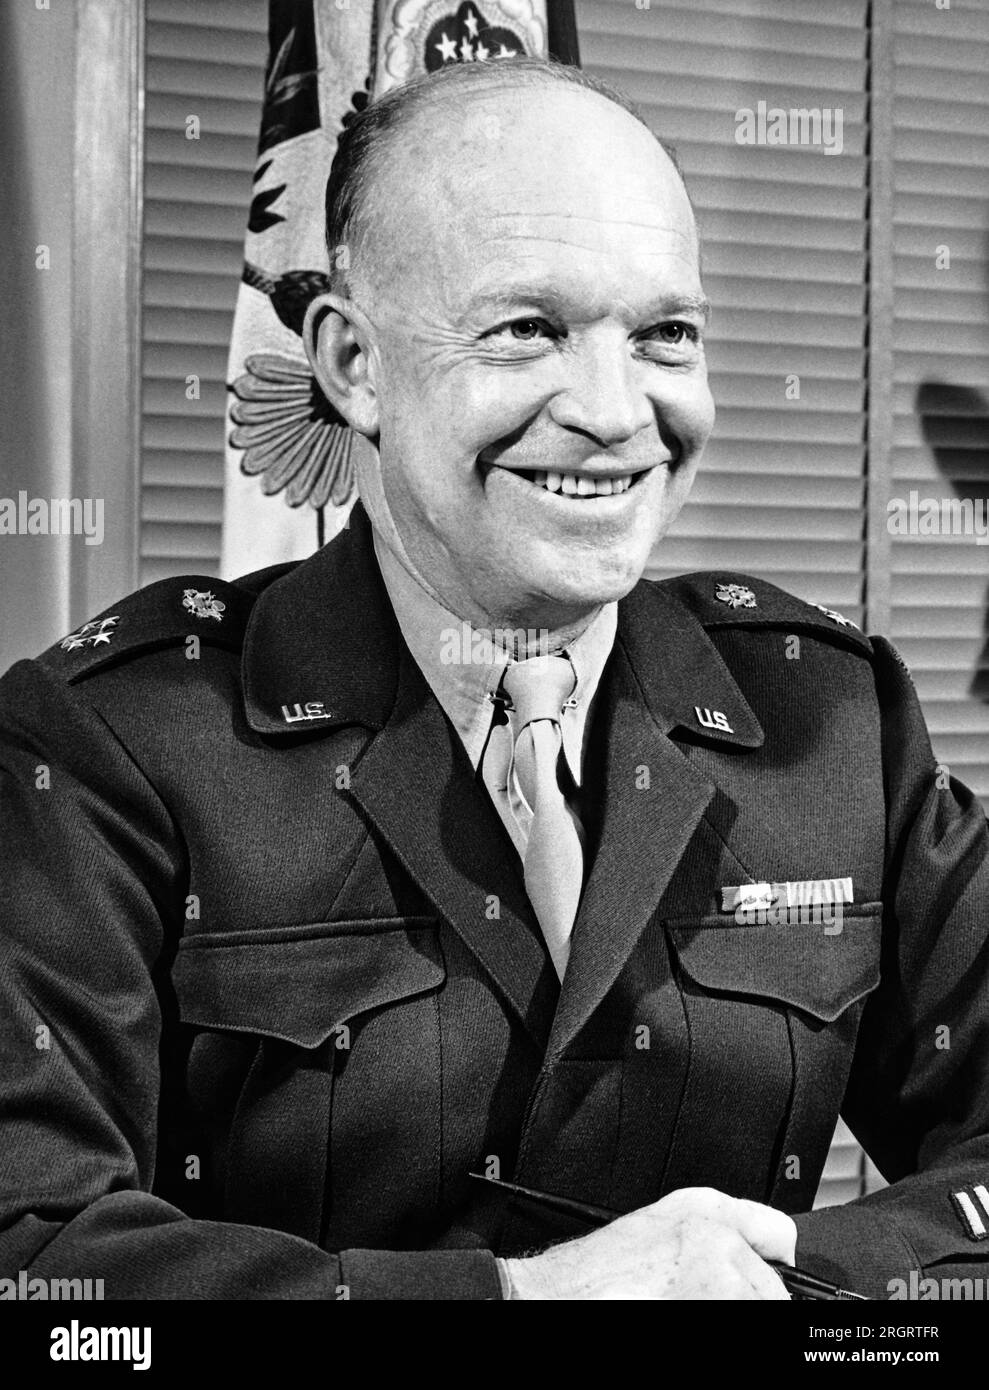 Washington, D.C.:  December 7, 1945 The new Chief Of Staff, General of the Army Dwight D. Eisenhower, poses for the camera before assuming his new duties. Stock Photo